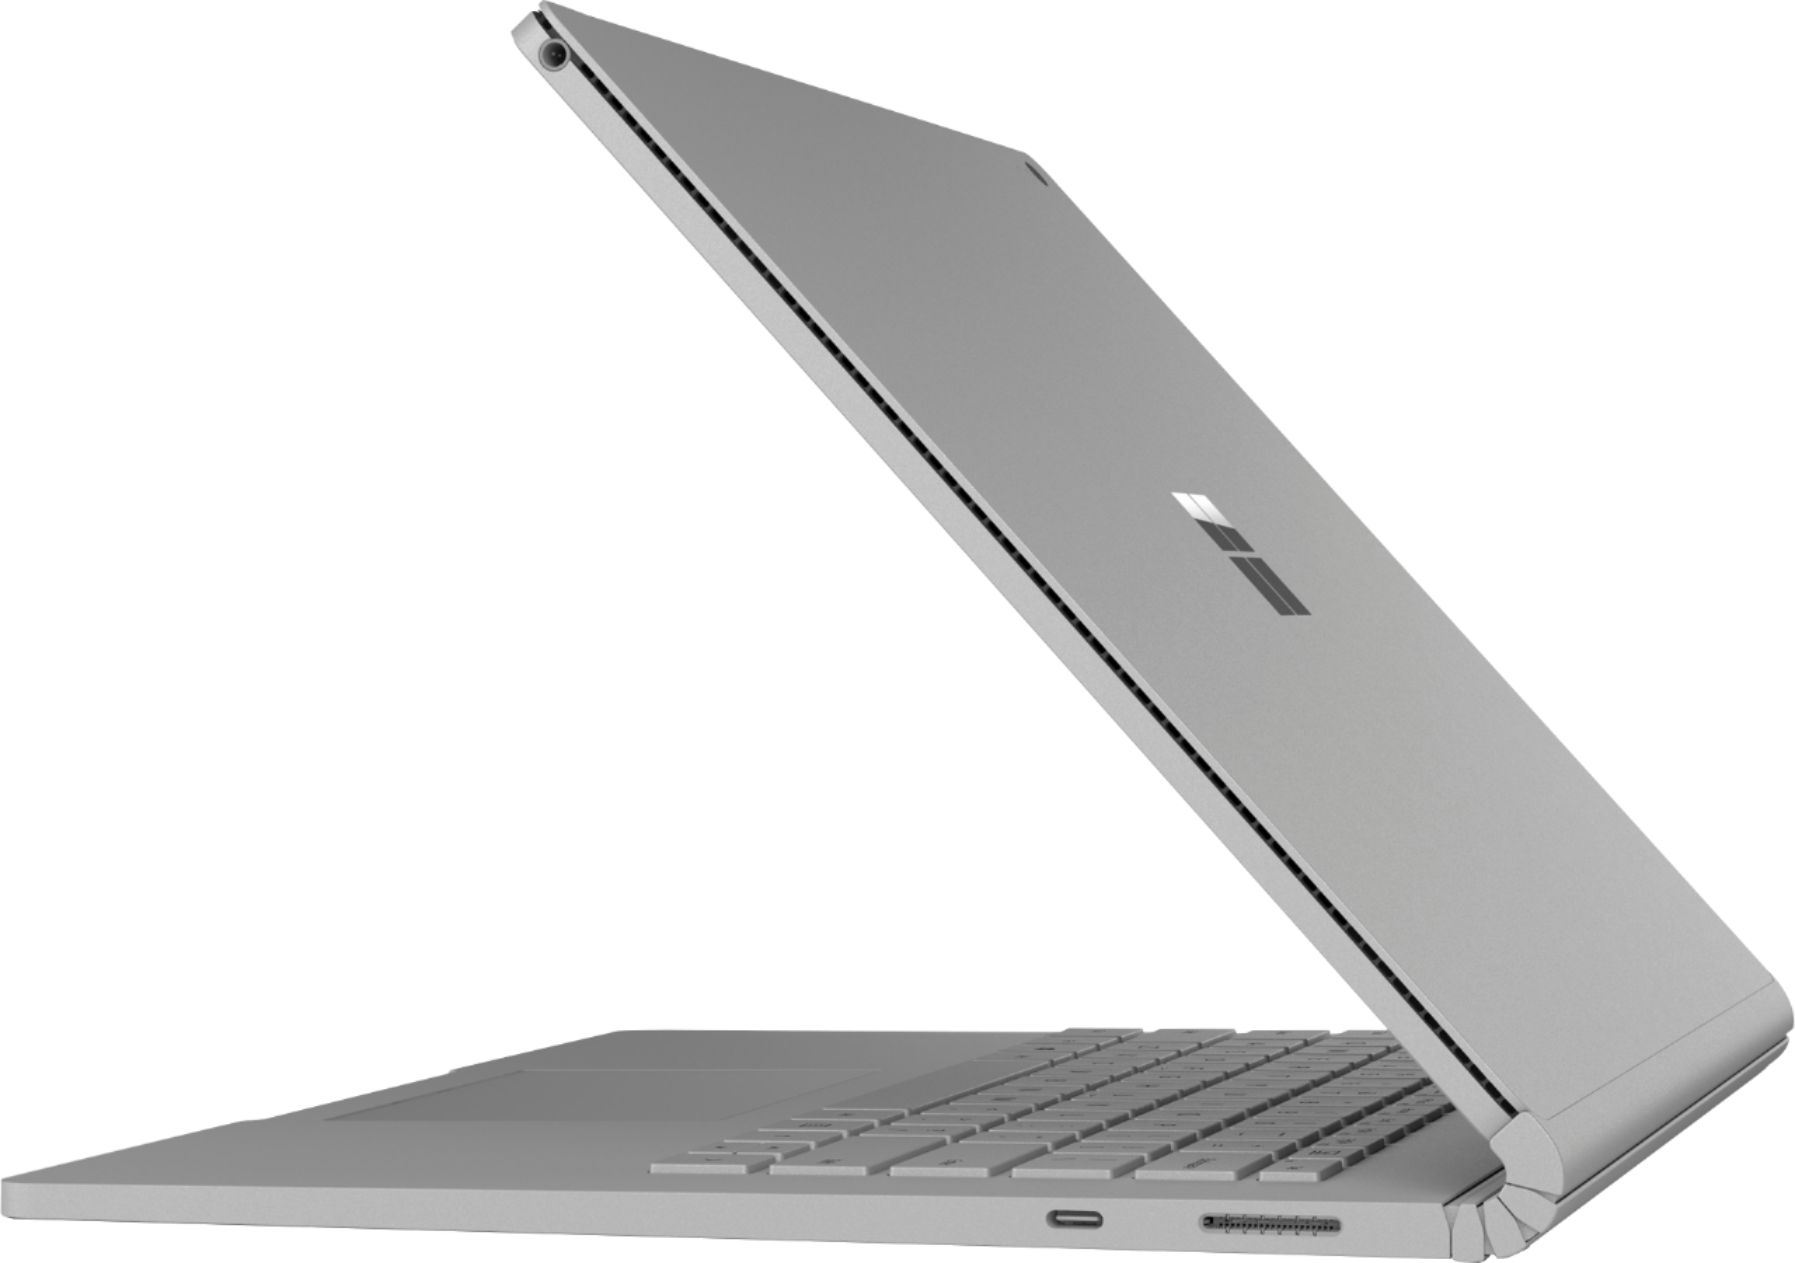 Left View: Microsoft - Geek Squad Certified Refurbished Surface Laptop Go 12.4" Touch-Screen Laptop - Intel Core i5 - 8GB Memory - 128GB SSD - Sandstone